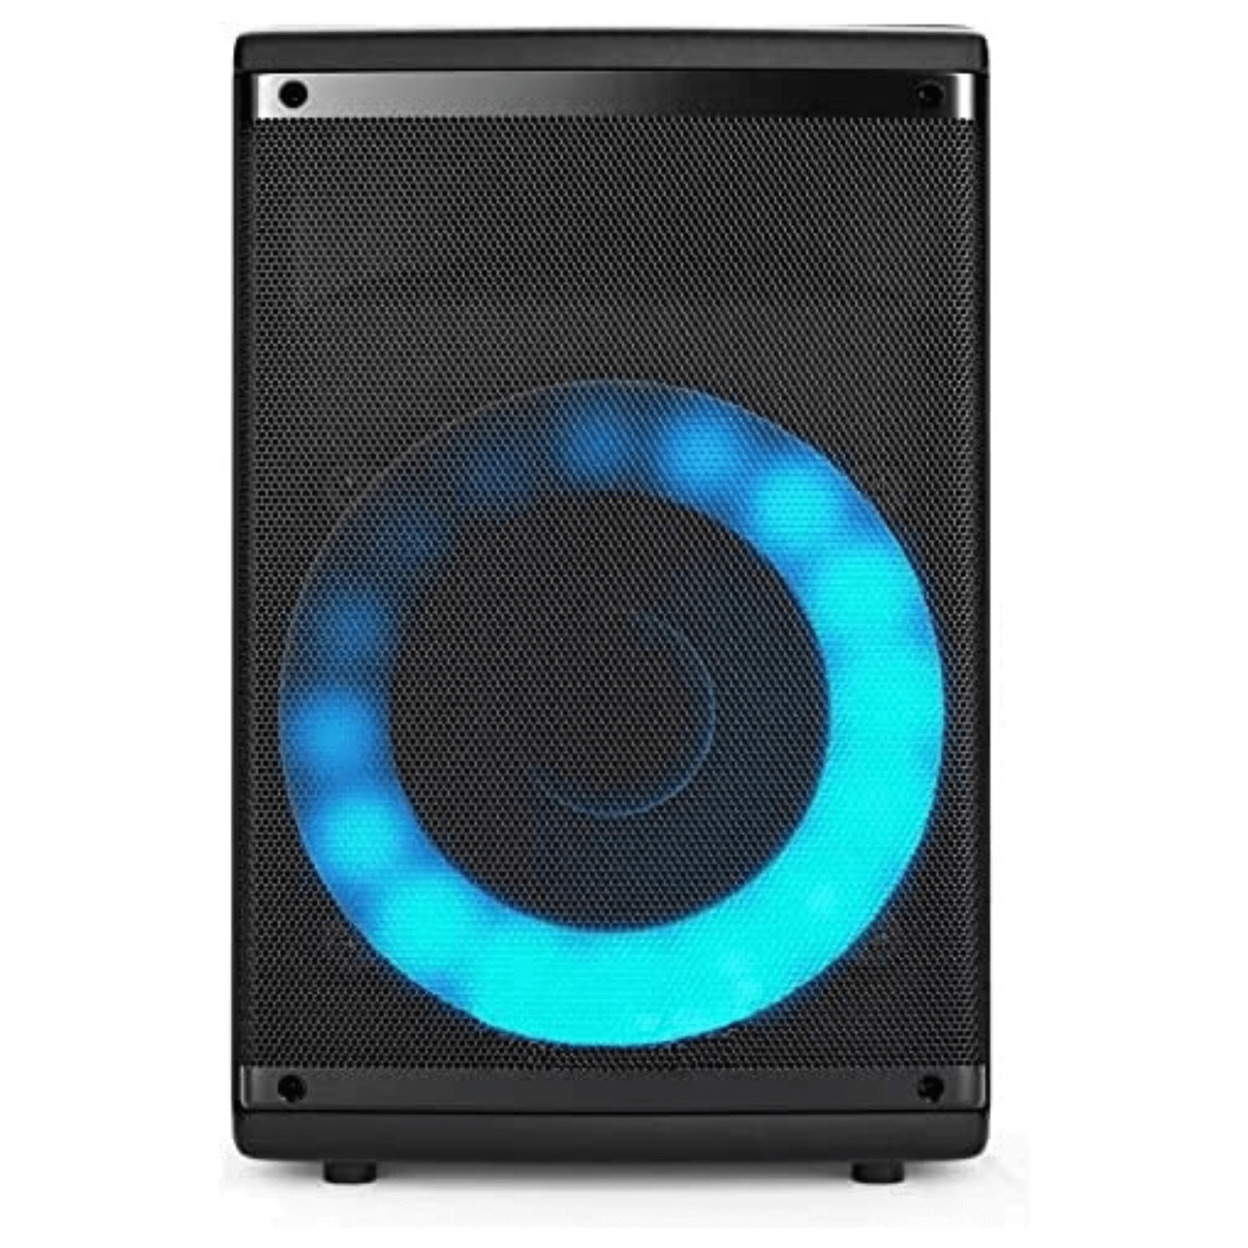 Norcent Portable Bluetooth TWS 8 Speaker System With Flashing LED Lights